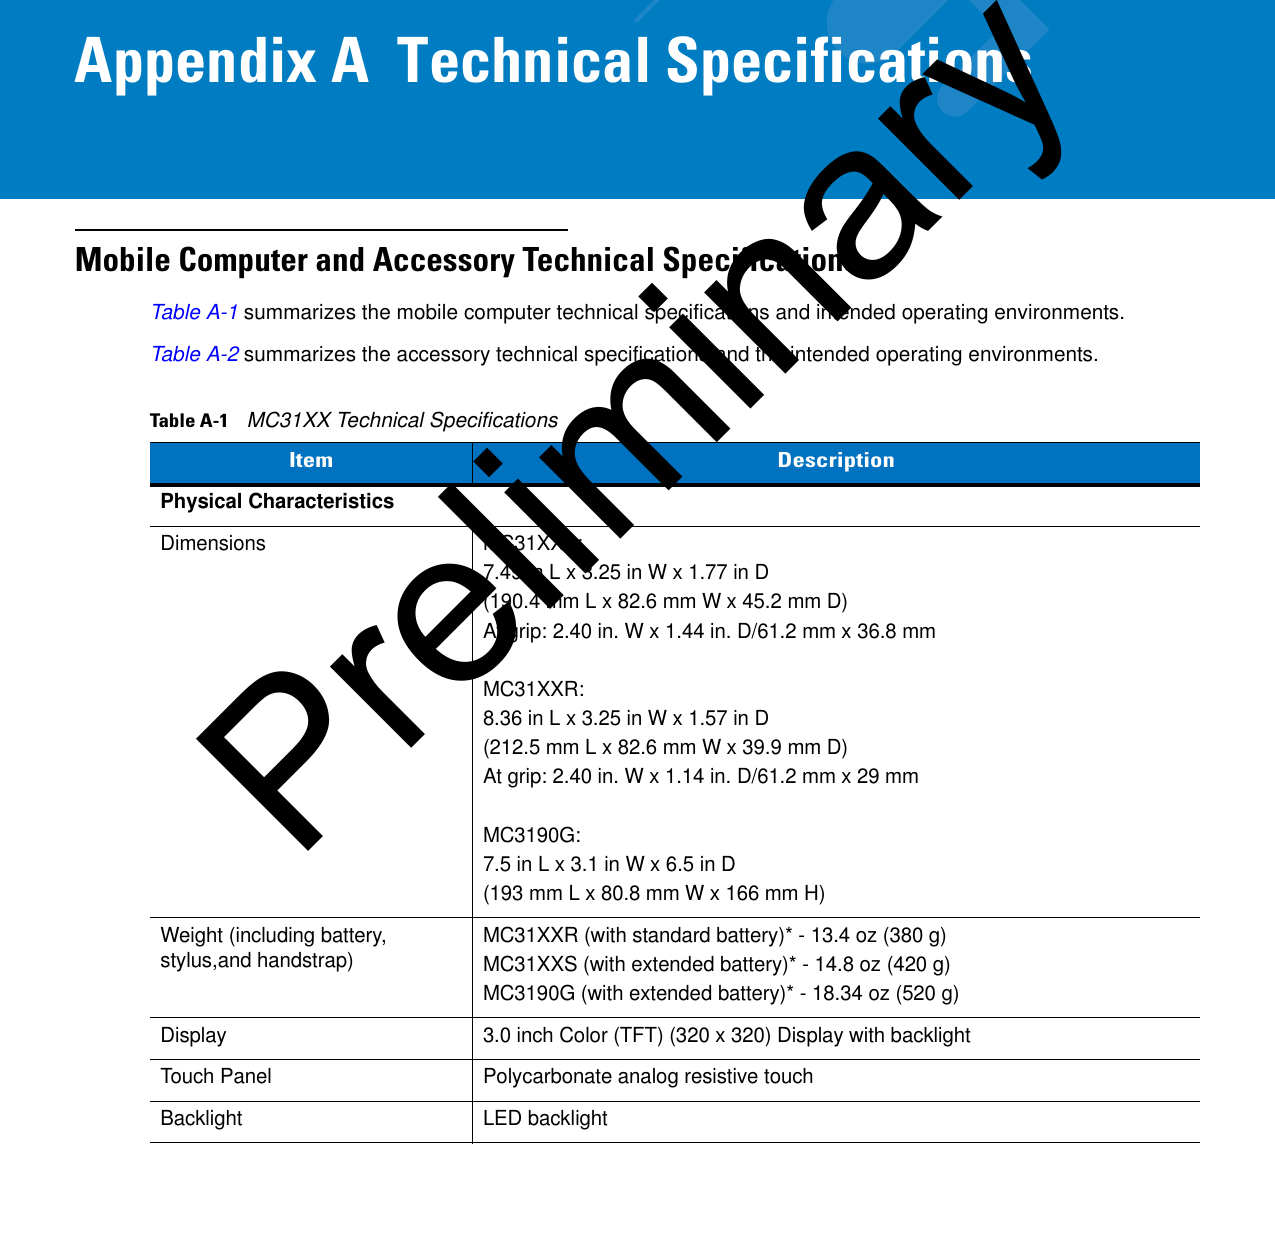 Appendix A  Technical SpecificationsMobile Computer and Accessory Technical SpecificationsTable A-1 summarizes the mobile computer technical specifications and intended operating environments. Table A-2 summarizes the accessory technical specifications and the intended operating environments.Table A-1    MC31XX Technical SpecificationsItemDescriptionPhysical CharacteristicsDimensions MC31XXS:7.49 in L x 3.25 in W x 1.77 in D(190.4 mm L x 82.6 mm W x 45.2 mm D)At grip: 2.40 in. W x 1.44 in. D/61.2 mm x 36.8 mmMC31XXR:8.36 in L x 3.25 in W x 1.57 in D(212.5 mm L x 82.6 mm W x 39.9 mm D)At grip: 2.40 in. W x 1.14 in. D/61.2 mm x 29 mmMC3190G:7.5 in L x 3.1 in W x 6.5 in D(193 mm L x 80.8 mm W x 166 mm H)Weight (including battery, stylus,and handstrap) MC31XXR (with standard battery)* - 13.4 oz (380 g)MC31XXS (with extended battery)* - 14.8 oz (420 g)MC3190G (with extended battery)* - 18.34 oz (520 g)Display 3.0 inch Color (TFT) (320 x 320) Display with backlightTouch Panel Polycarbonate analog resistive touchBacklight LED backlightPreliminary